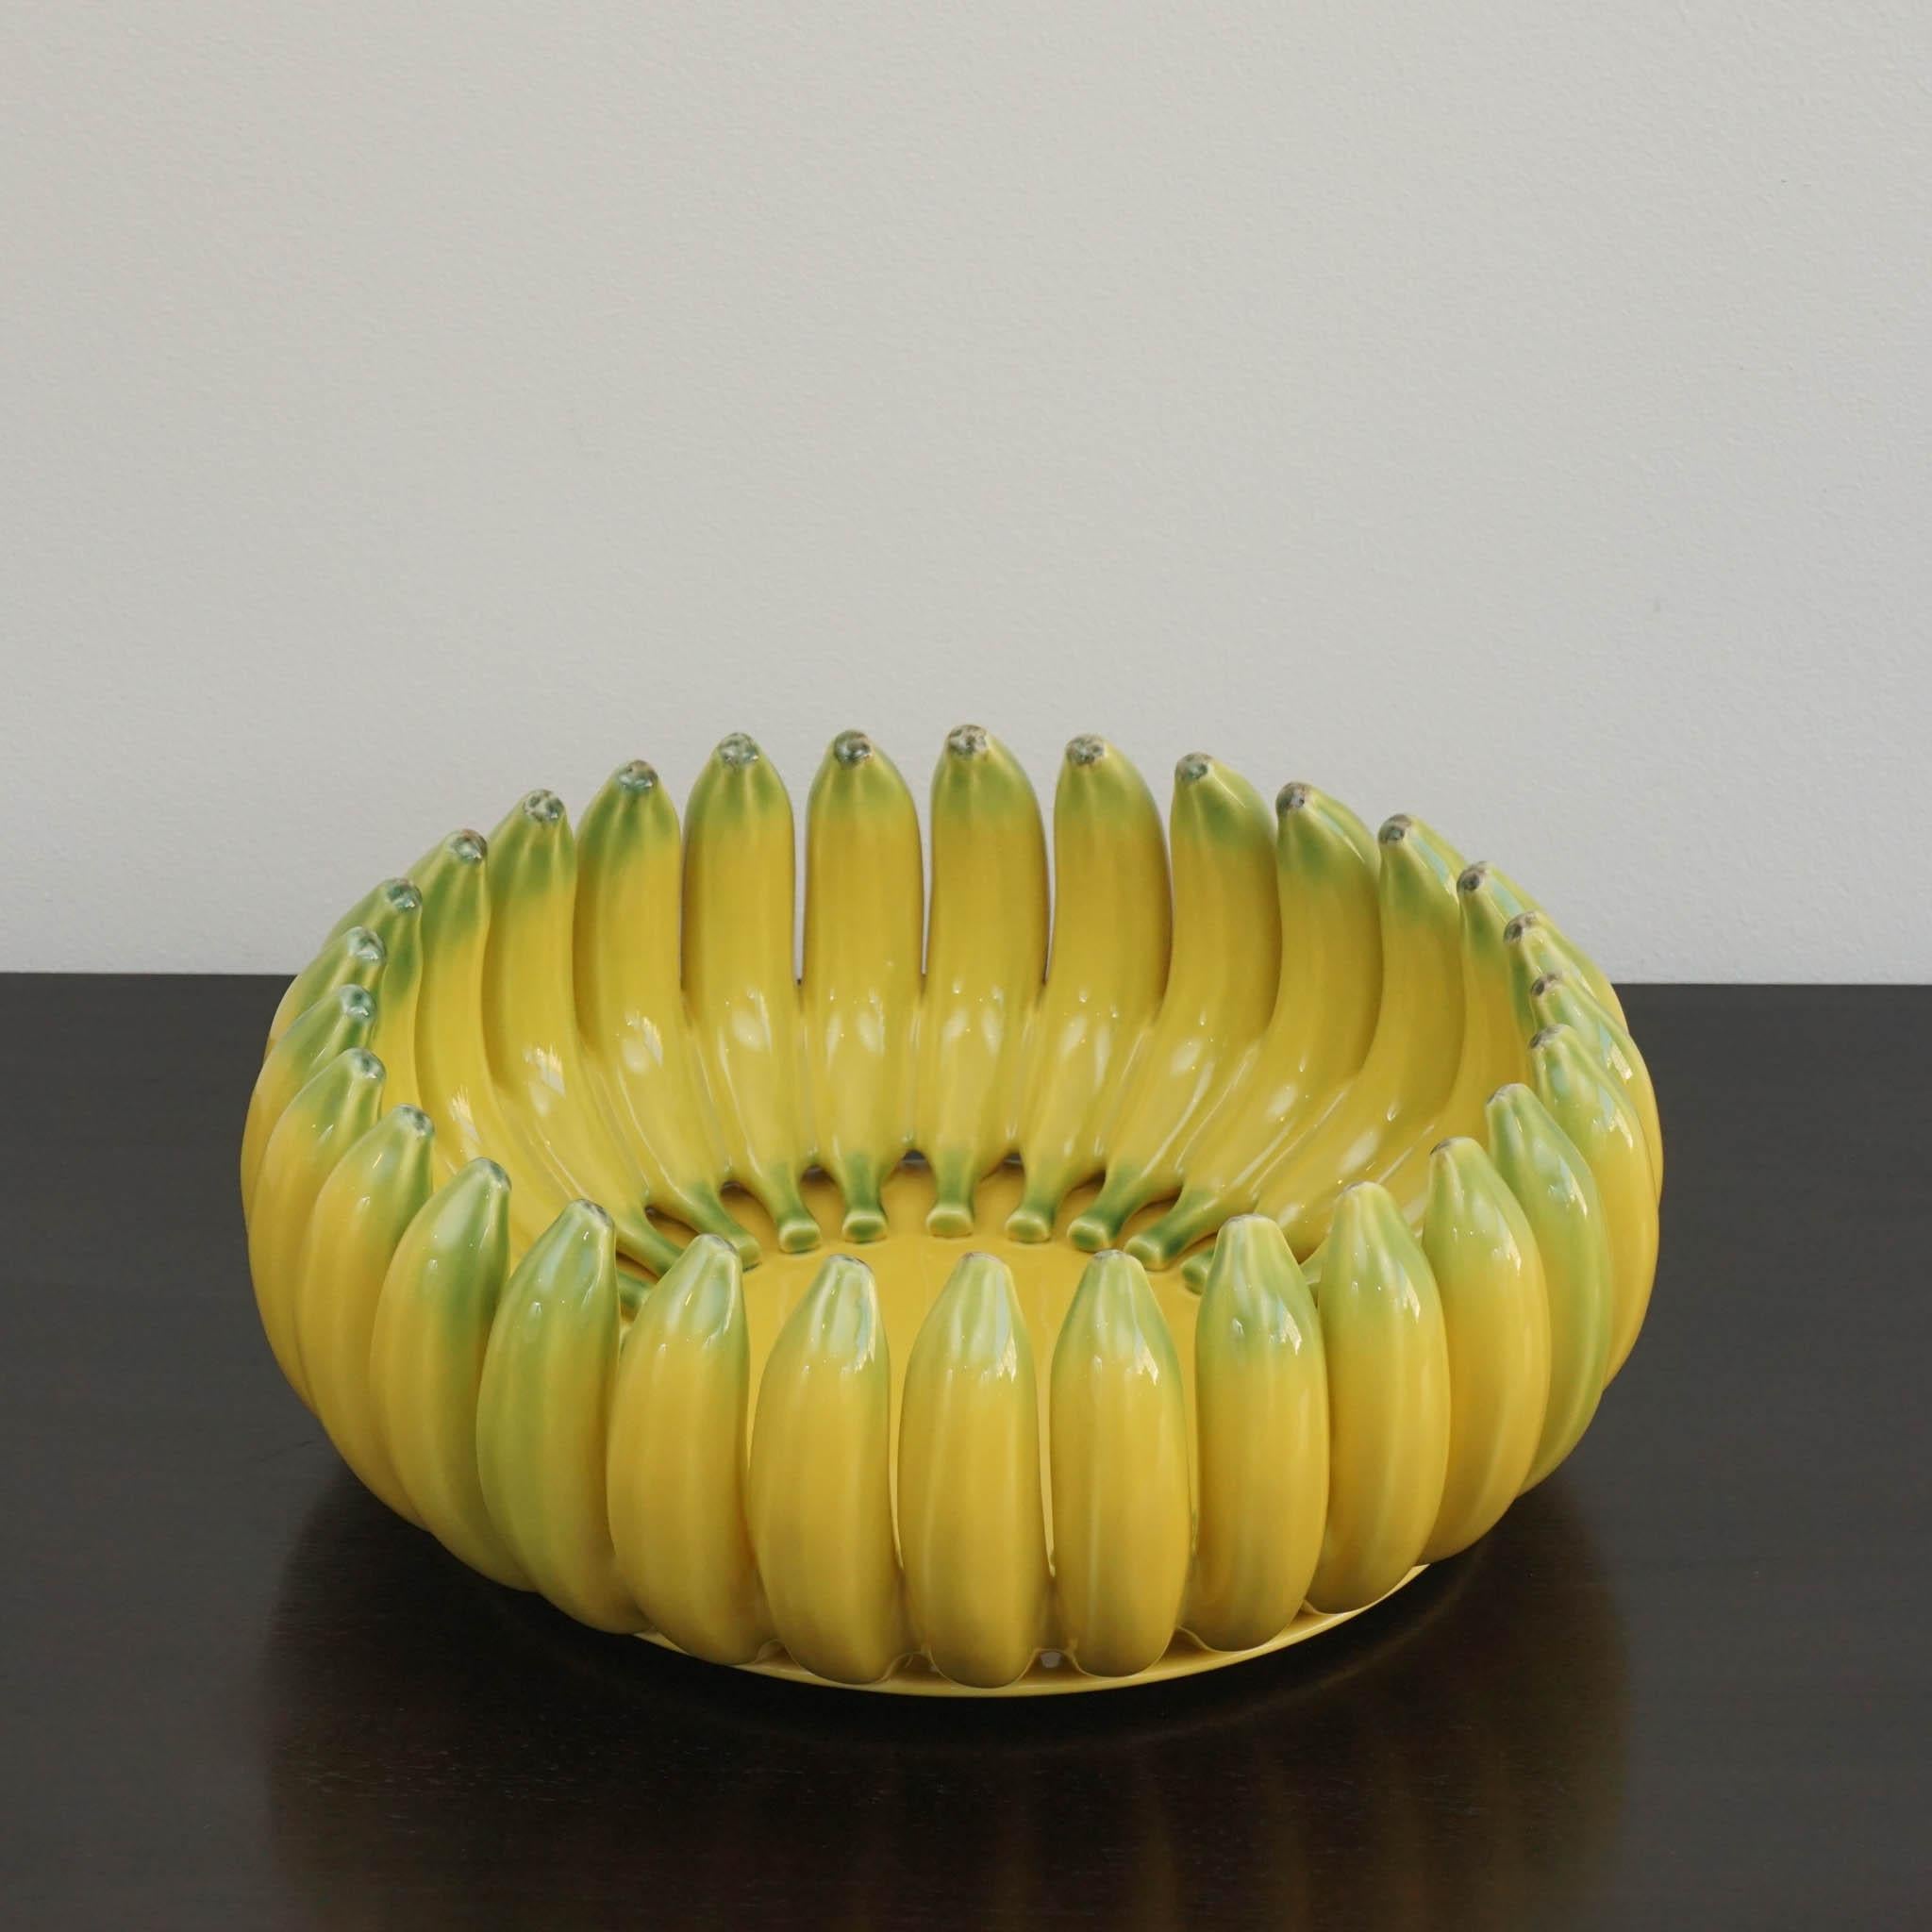 Set your table in fun tropical style with this banana decorated centerpiece from Bordallo Pinheiro. Made from earthenware, this centerpiece features a banana design. It is sure to bring a unique touch to your table and would be ideal for holding